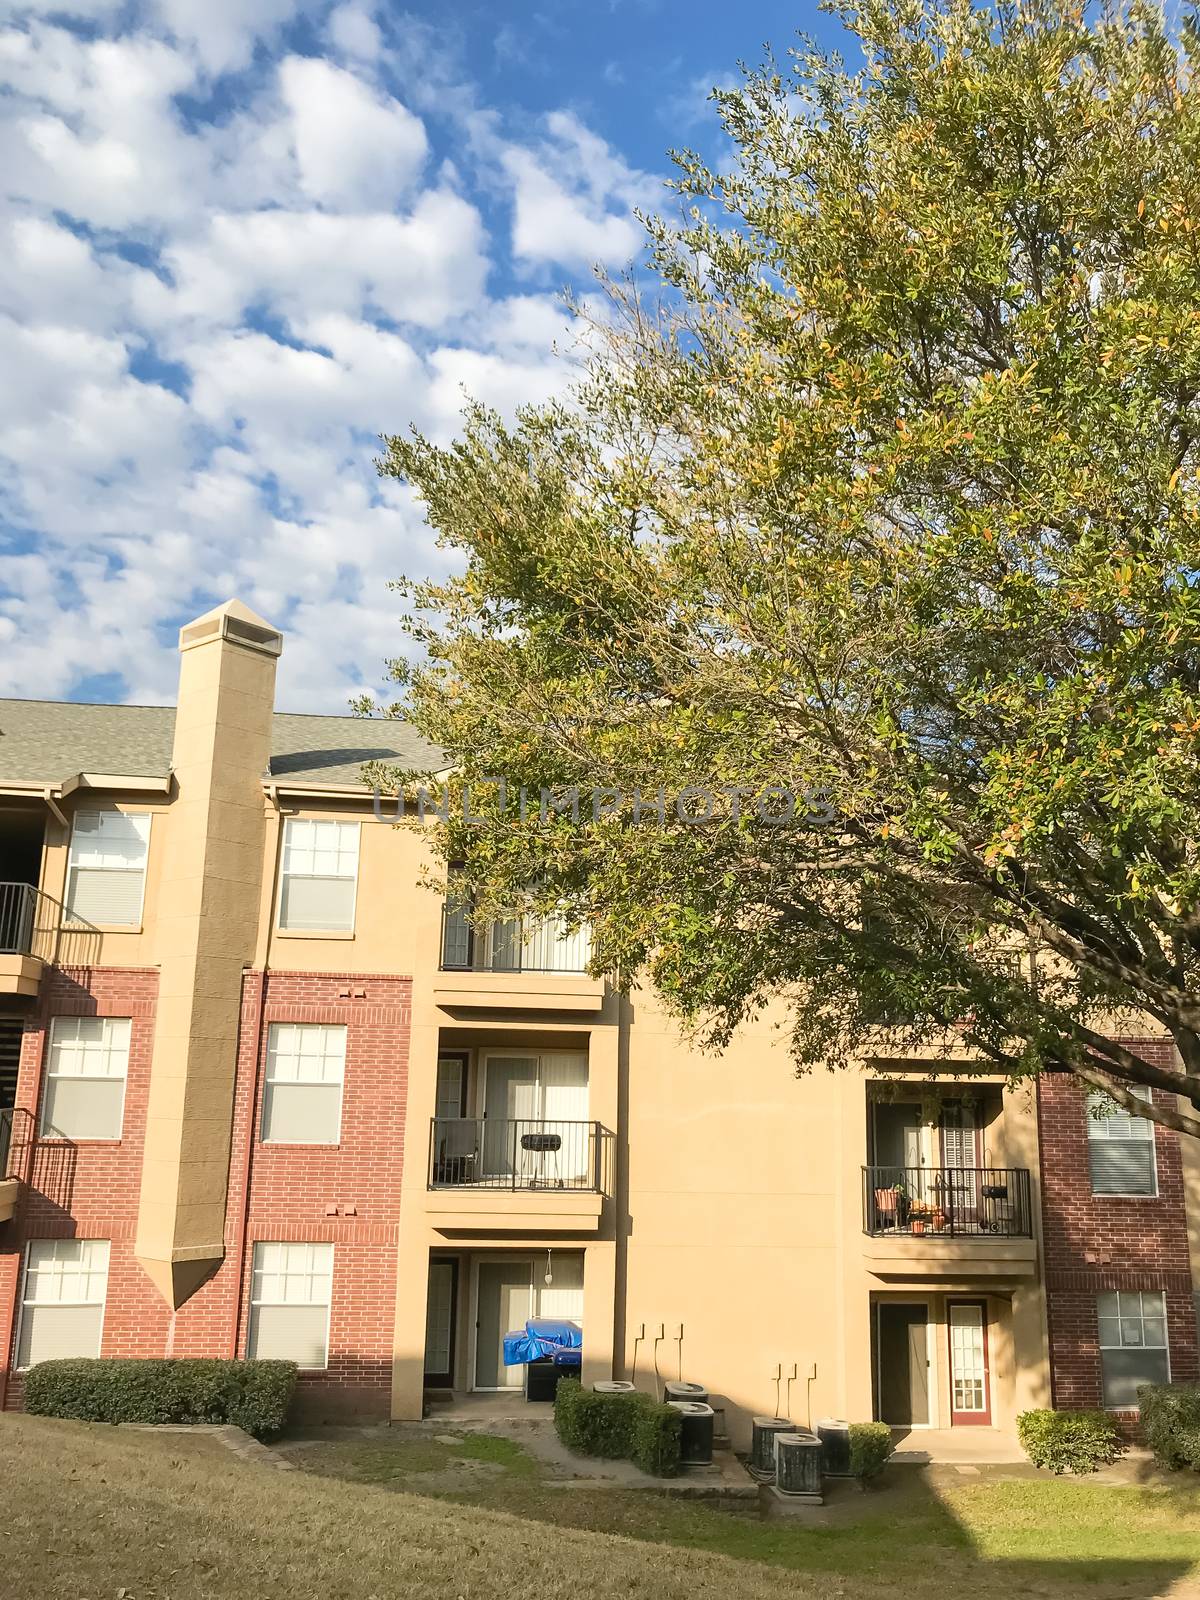 Apartment building complex with steep backyard and oak trees in suburban Dallas, Texas, USA. Low angle view of multi-stories rental real estate with covered parking at sunset cloud sky